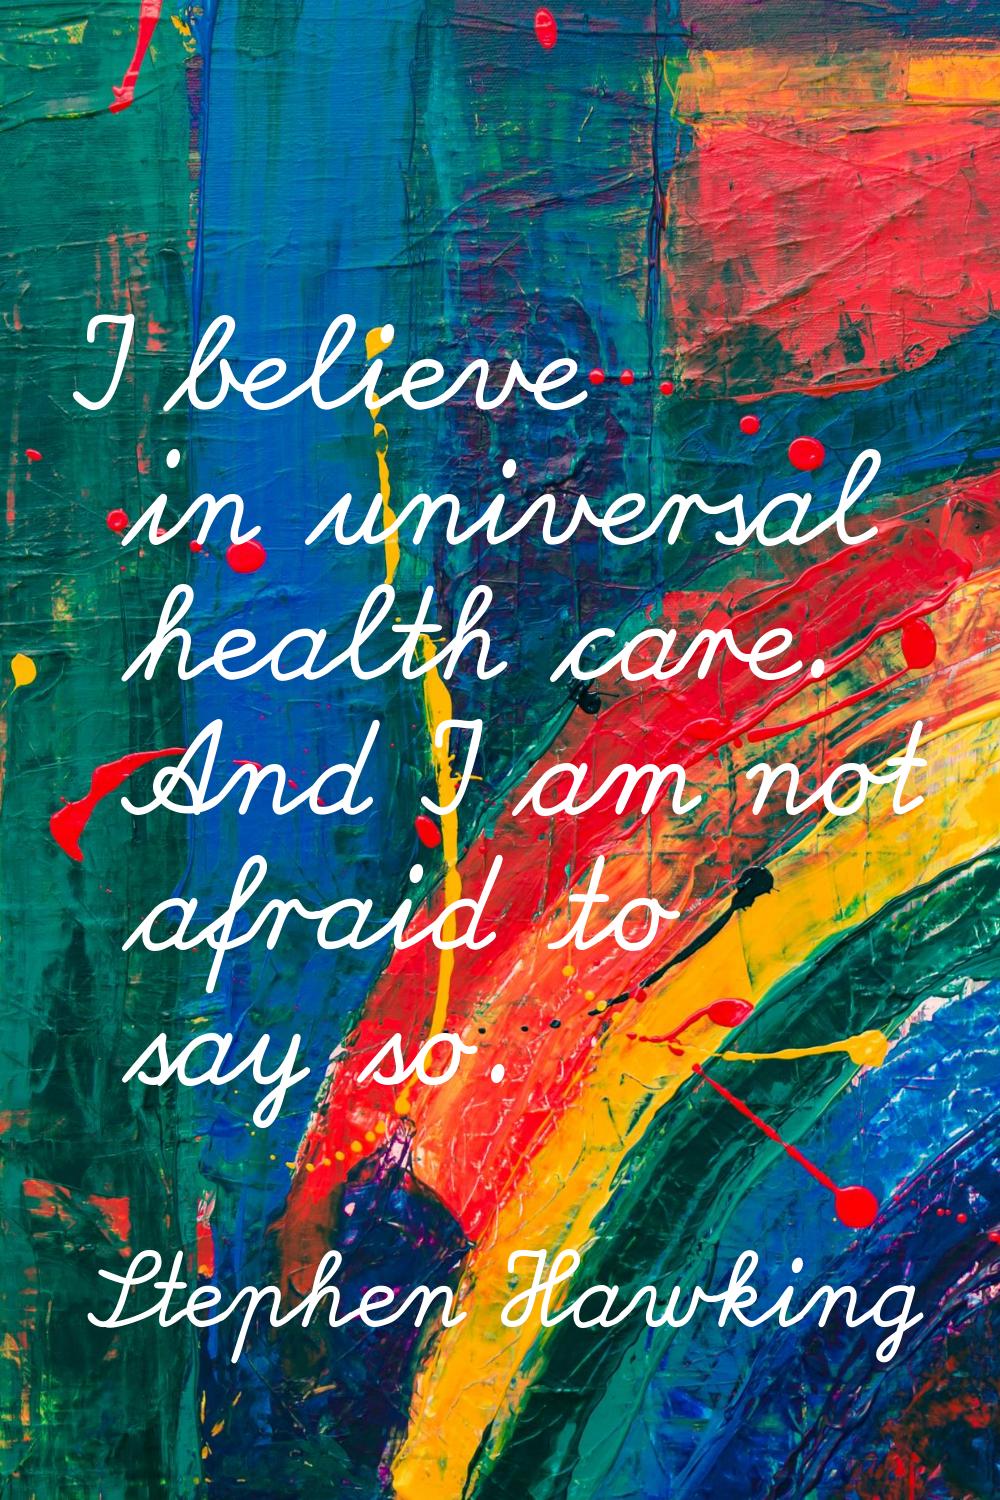 I believe in universal health care. And I am not afraid to say so.